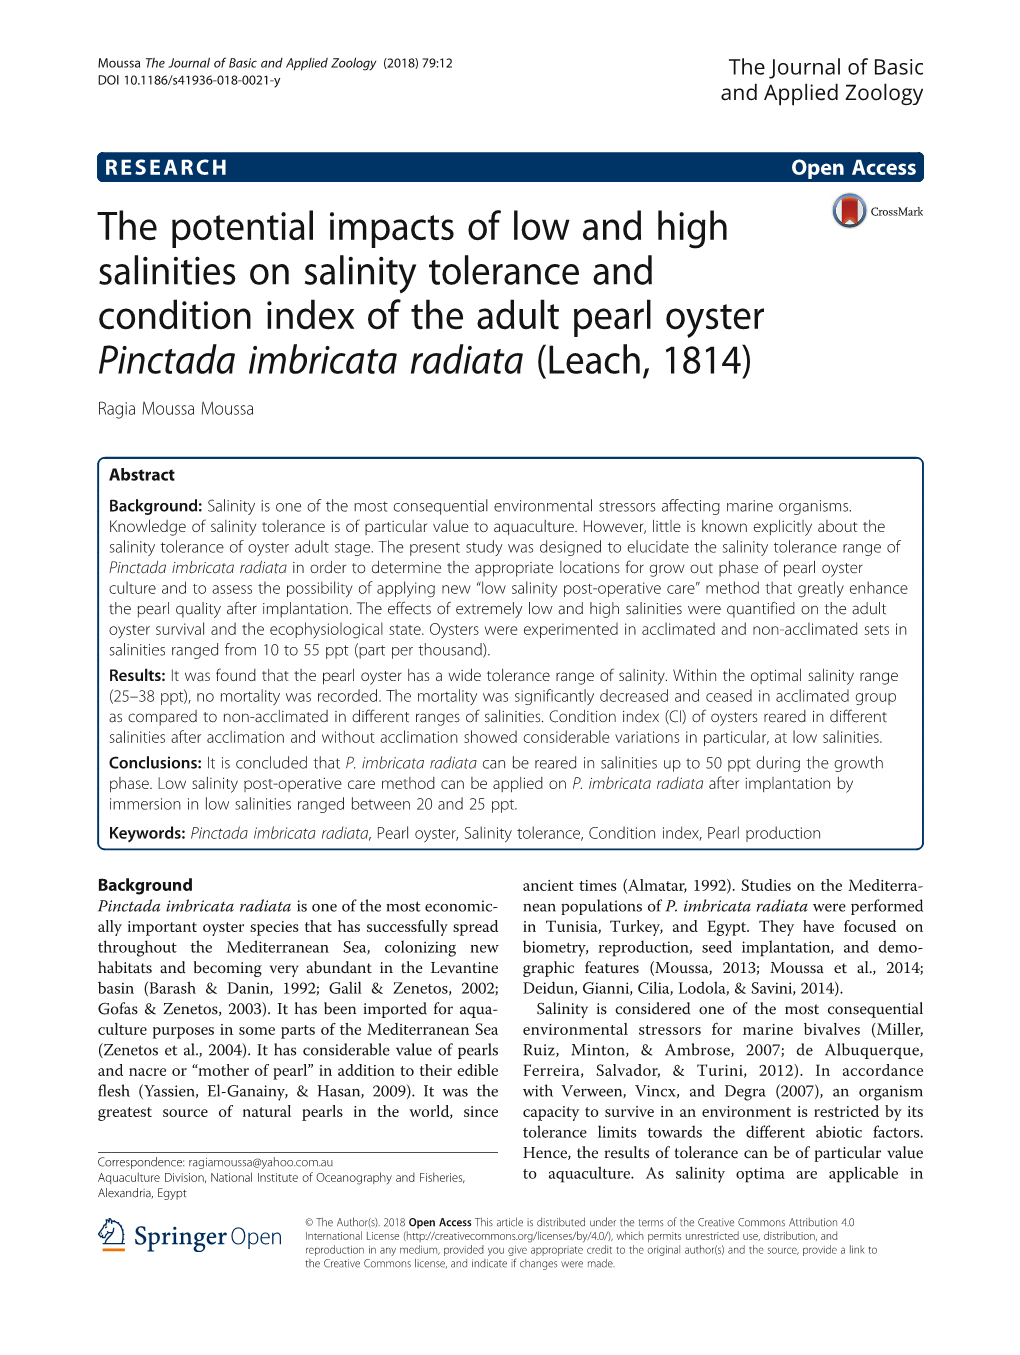 The Potential Impacts of Low and High Salinities on Salinity Tolerance And